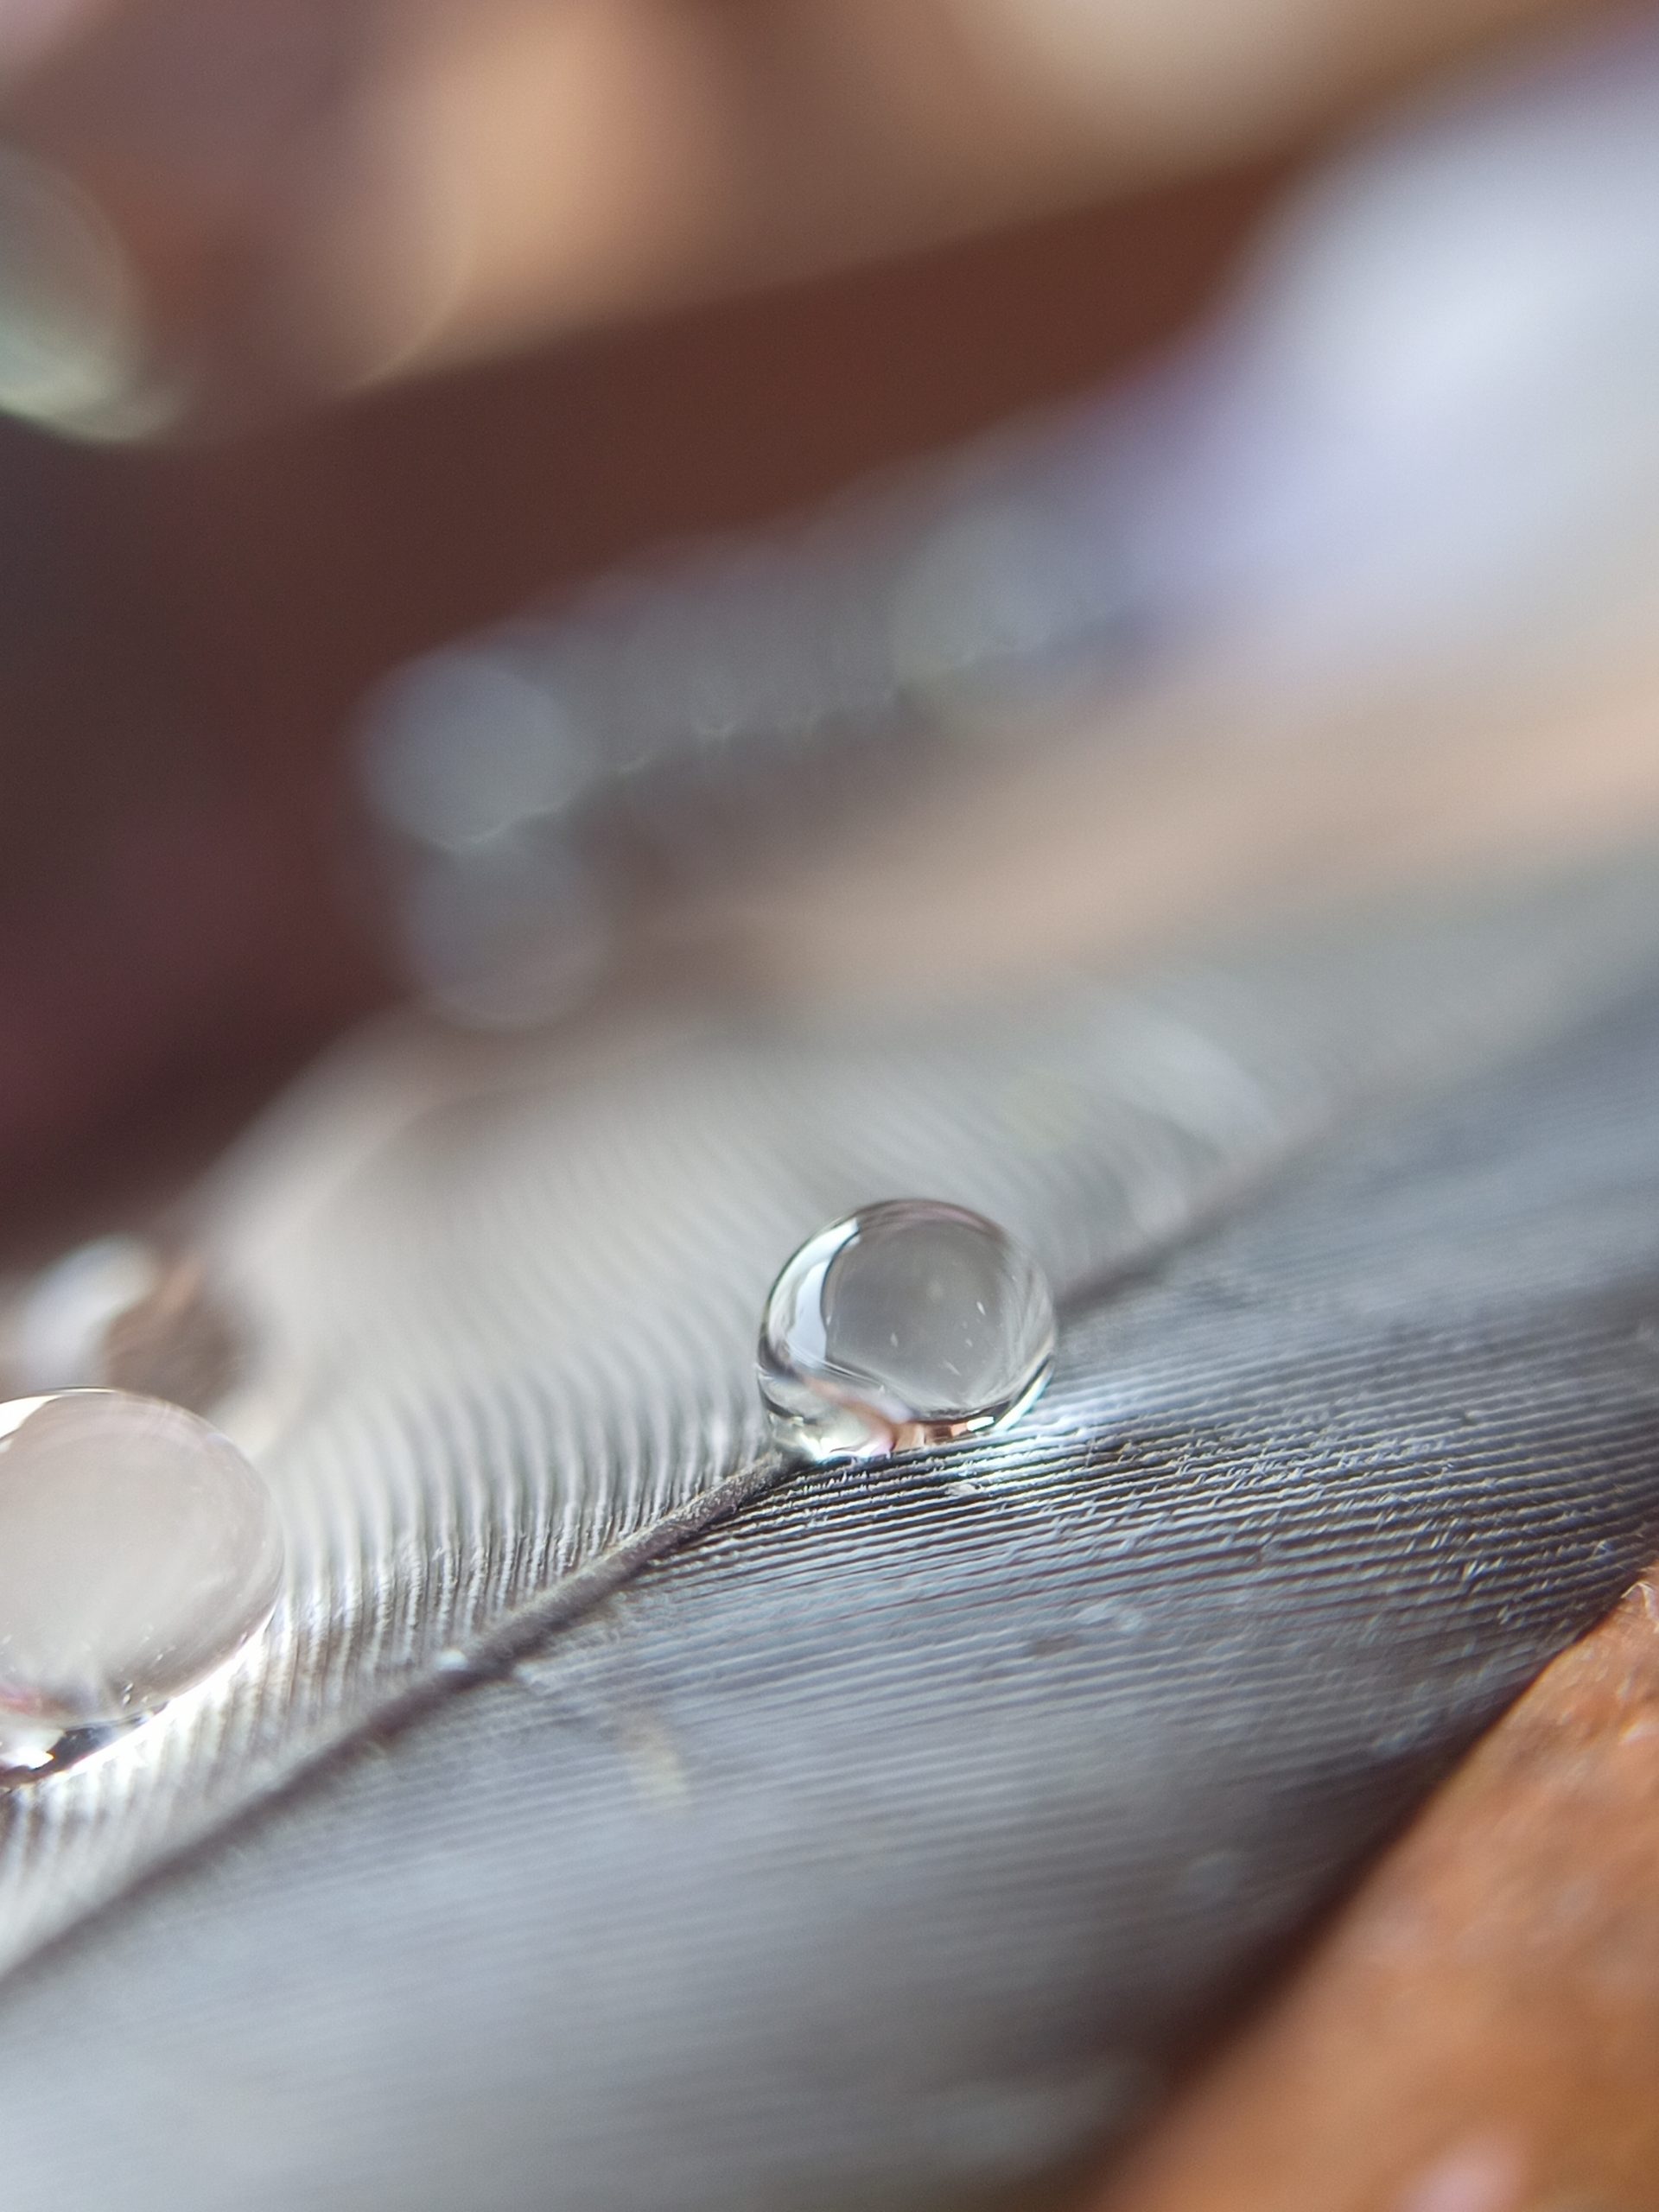 A water drop on a feather